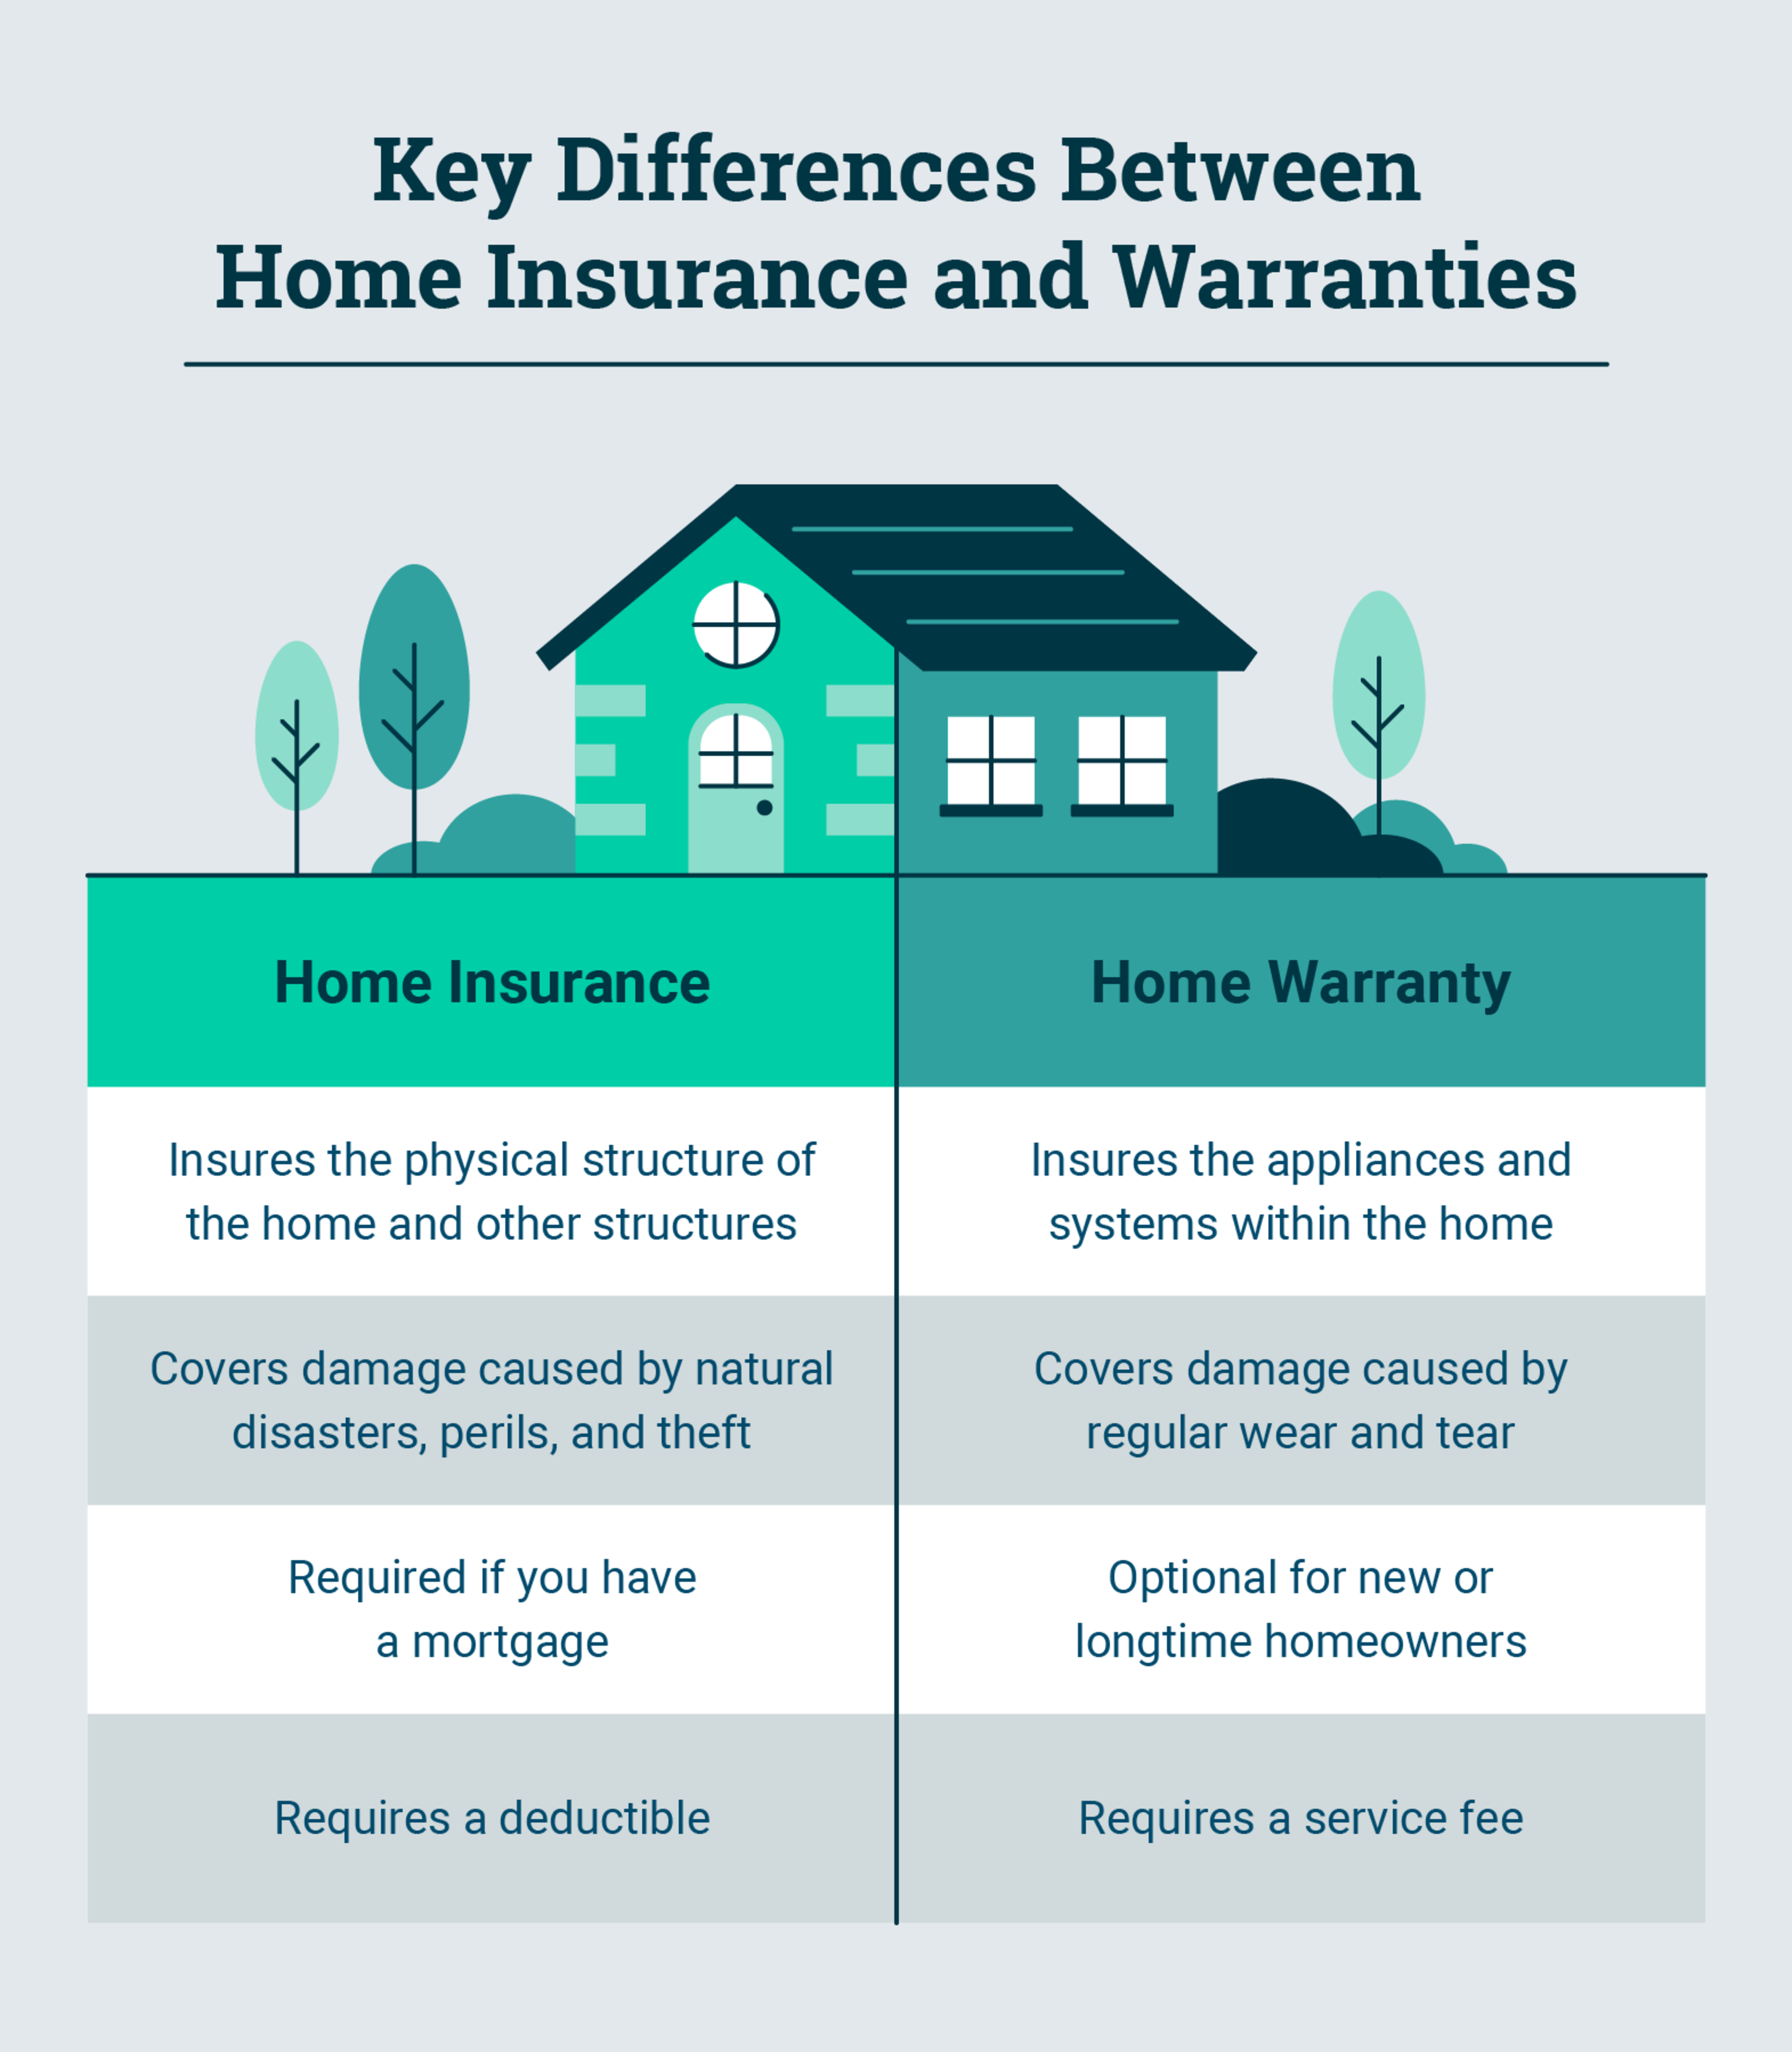 Key differences between a home warranty and home insurance